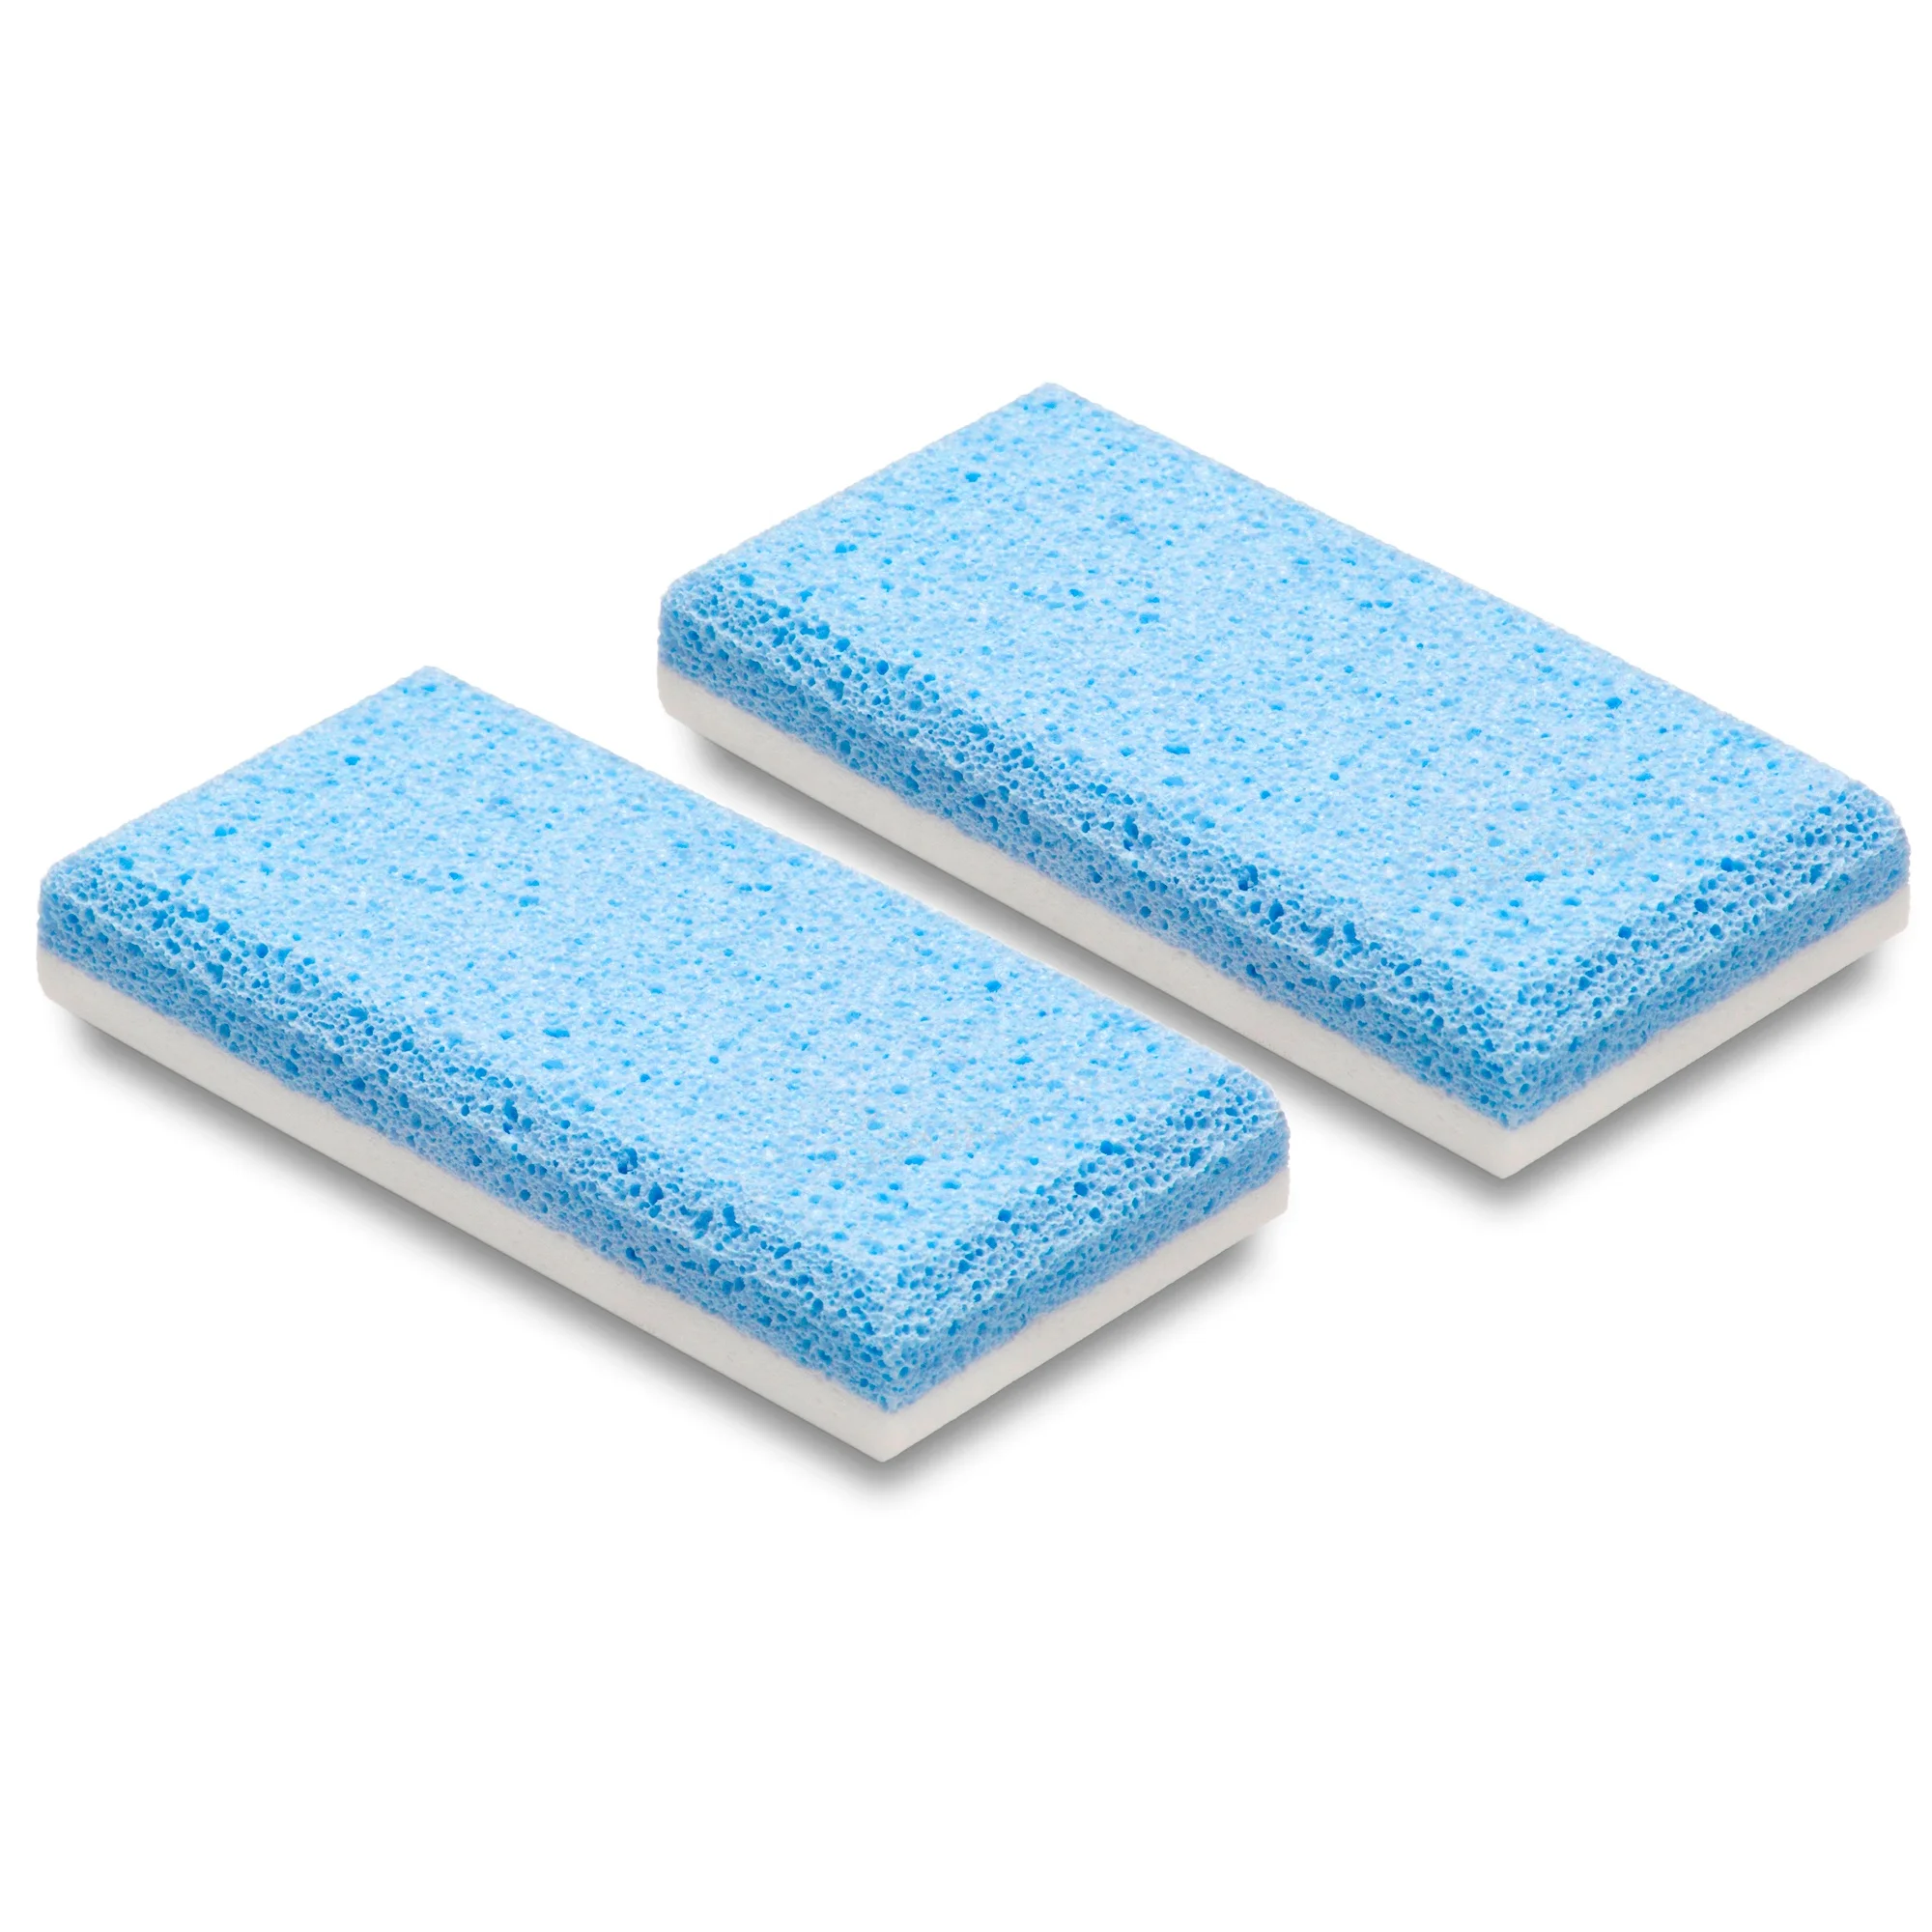 Pumice stone dual action – Premium Quality – Only manufacturer in the world that makes this pumice stone in one piece.